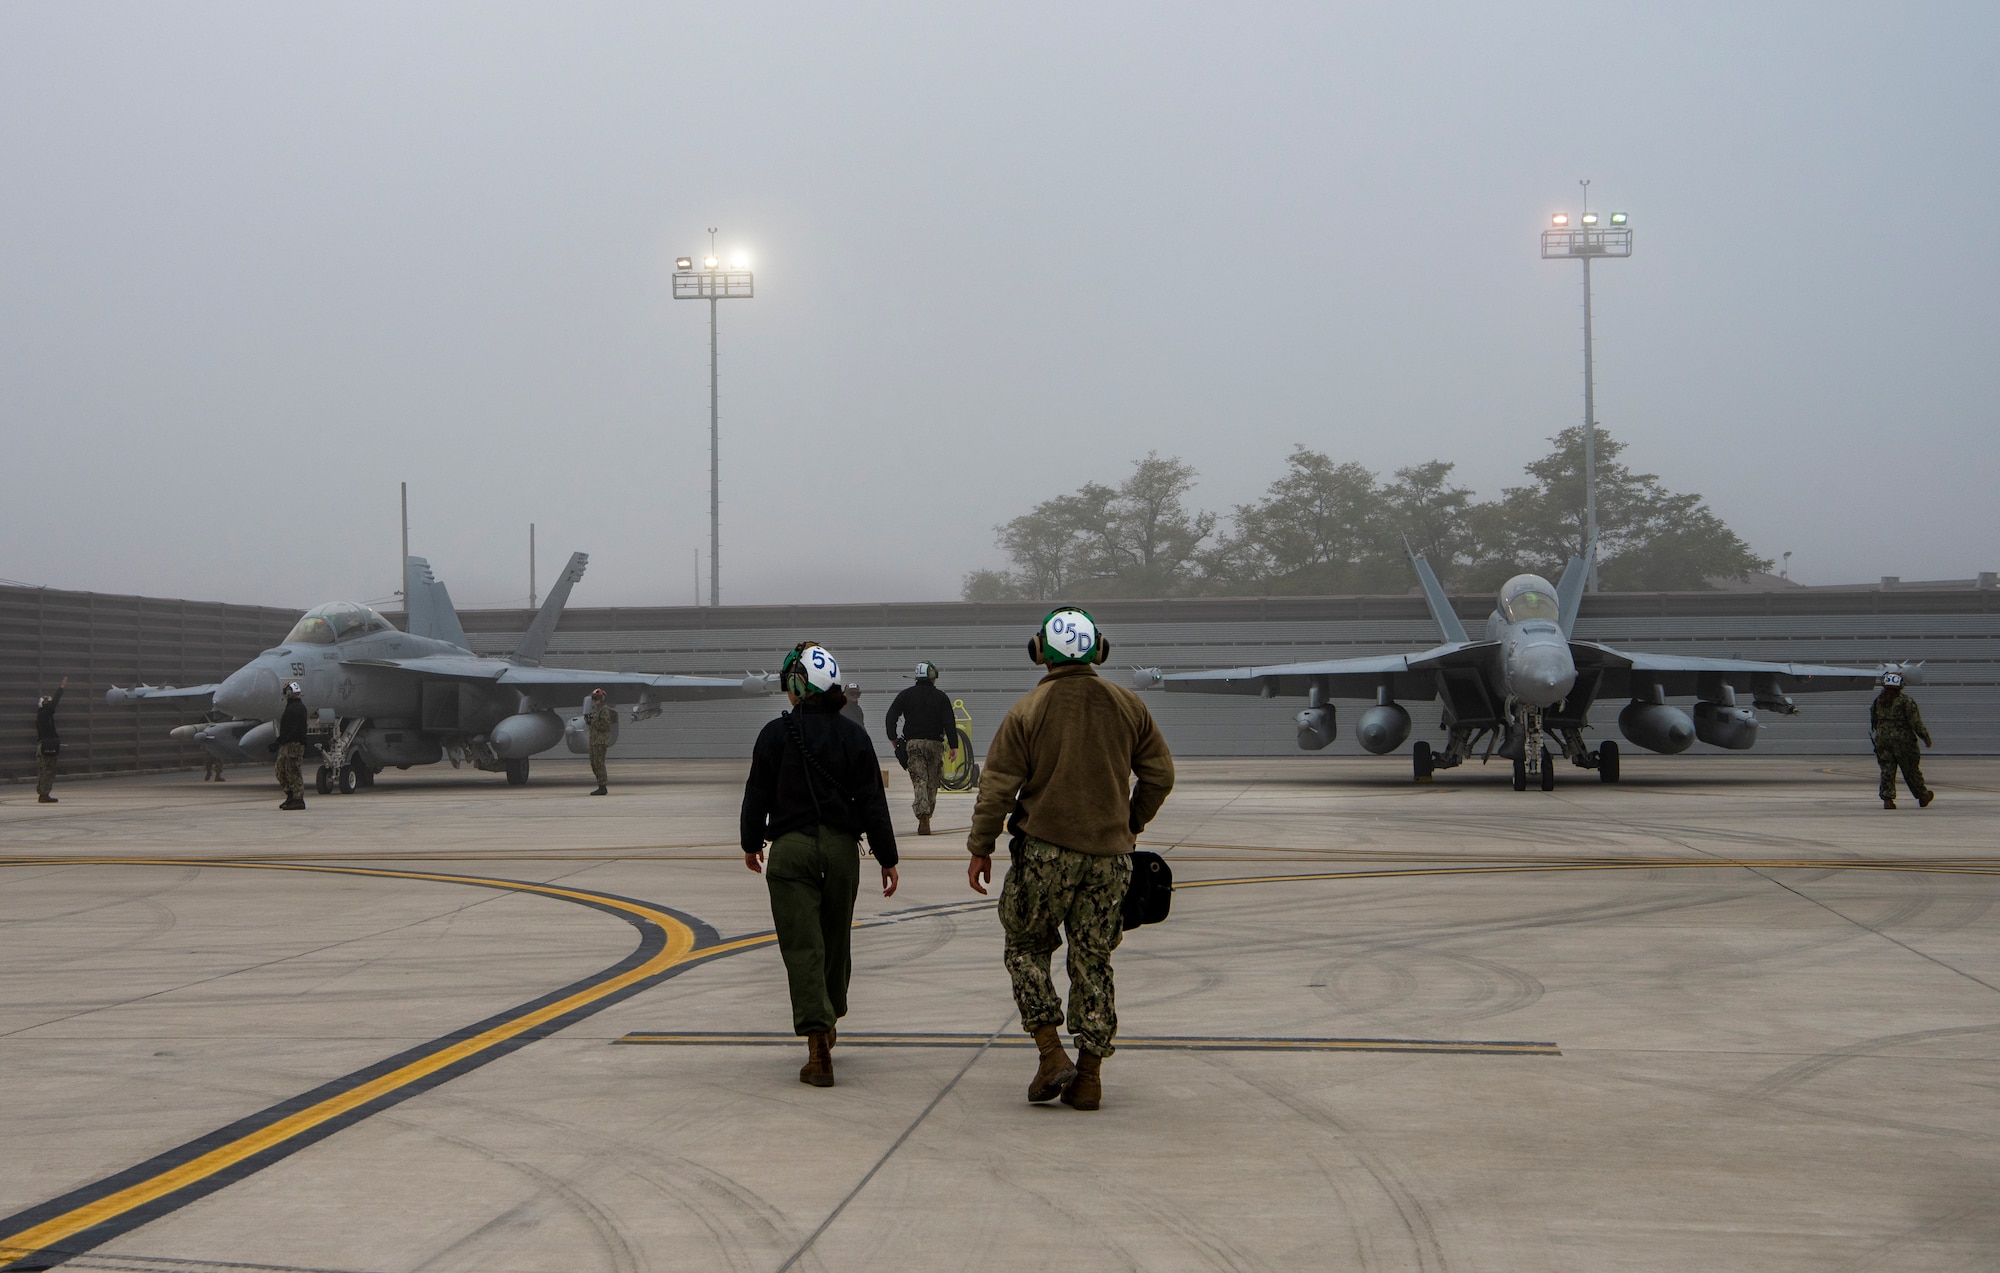 U.S. Navy Airmen assigned to the Electronic Attack Squadron (VAQ) 131 at Naval Air Station Whidbey Island, Washington, perform preflight procedures for EA-18G Growlers during Vigilant Storm 23 at Osan Air Base, Republic of Korea, Nov. 1, 2022.